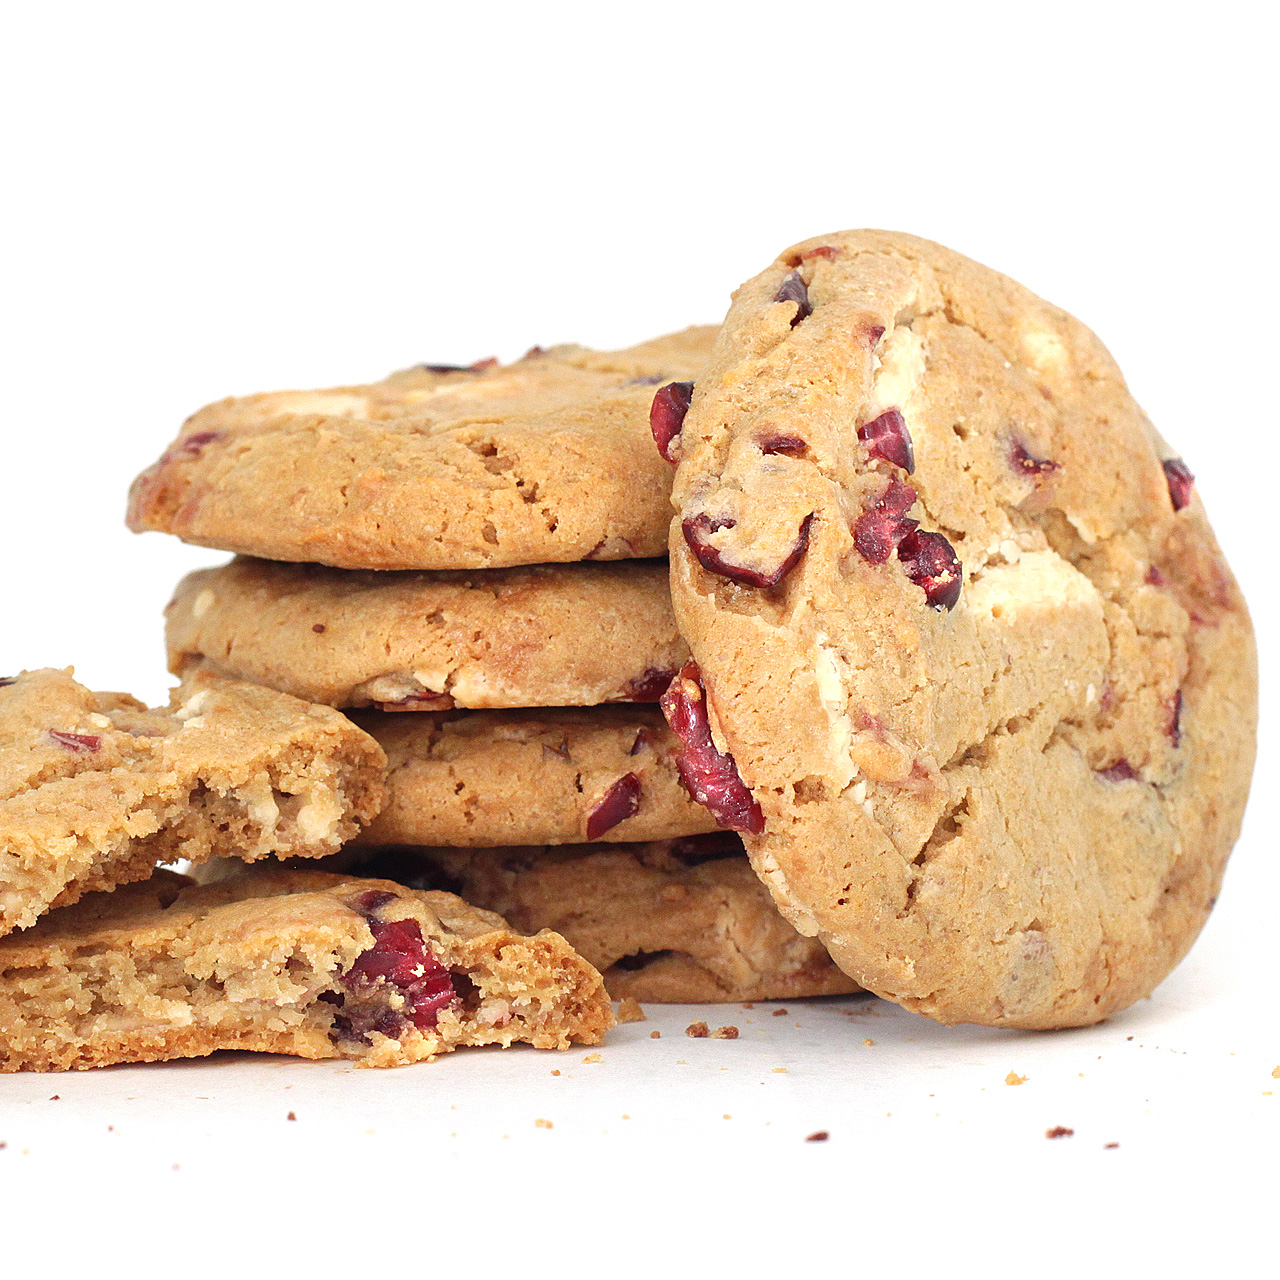 Stack of White Chocolate Cookies with Cranberries